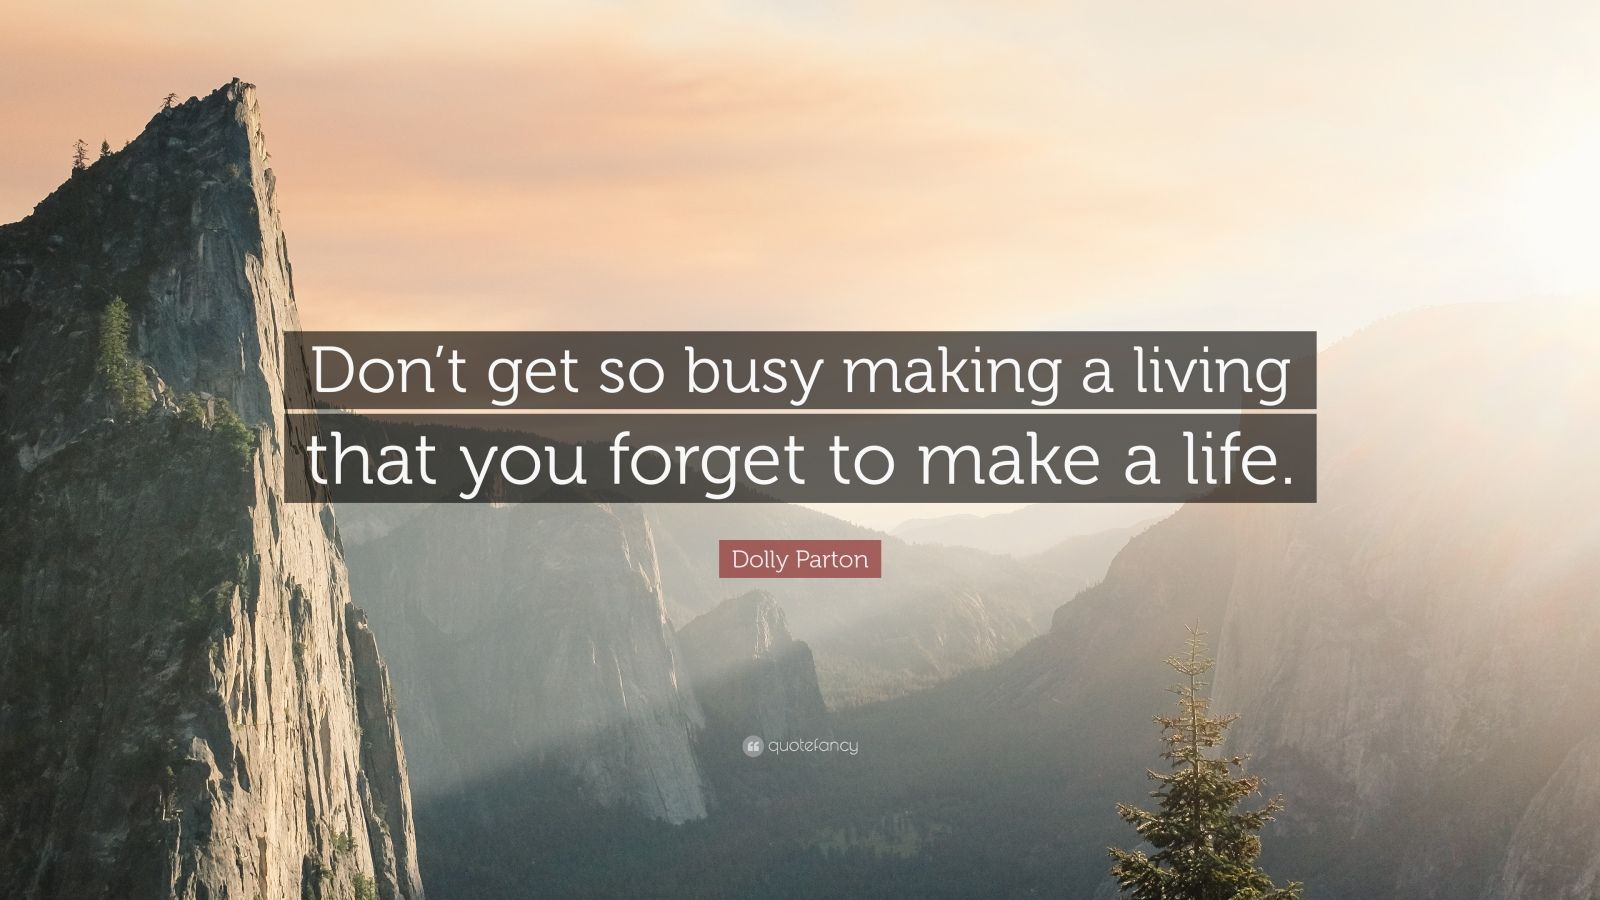 Motivational Quotes “Don t so busy making a living that you for